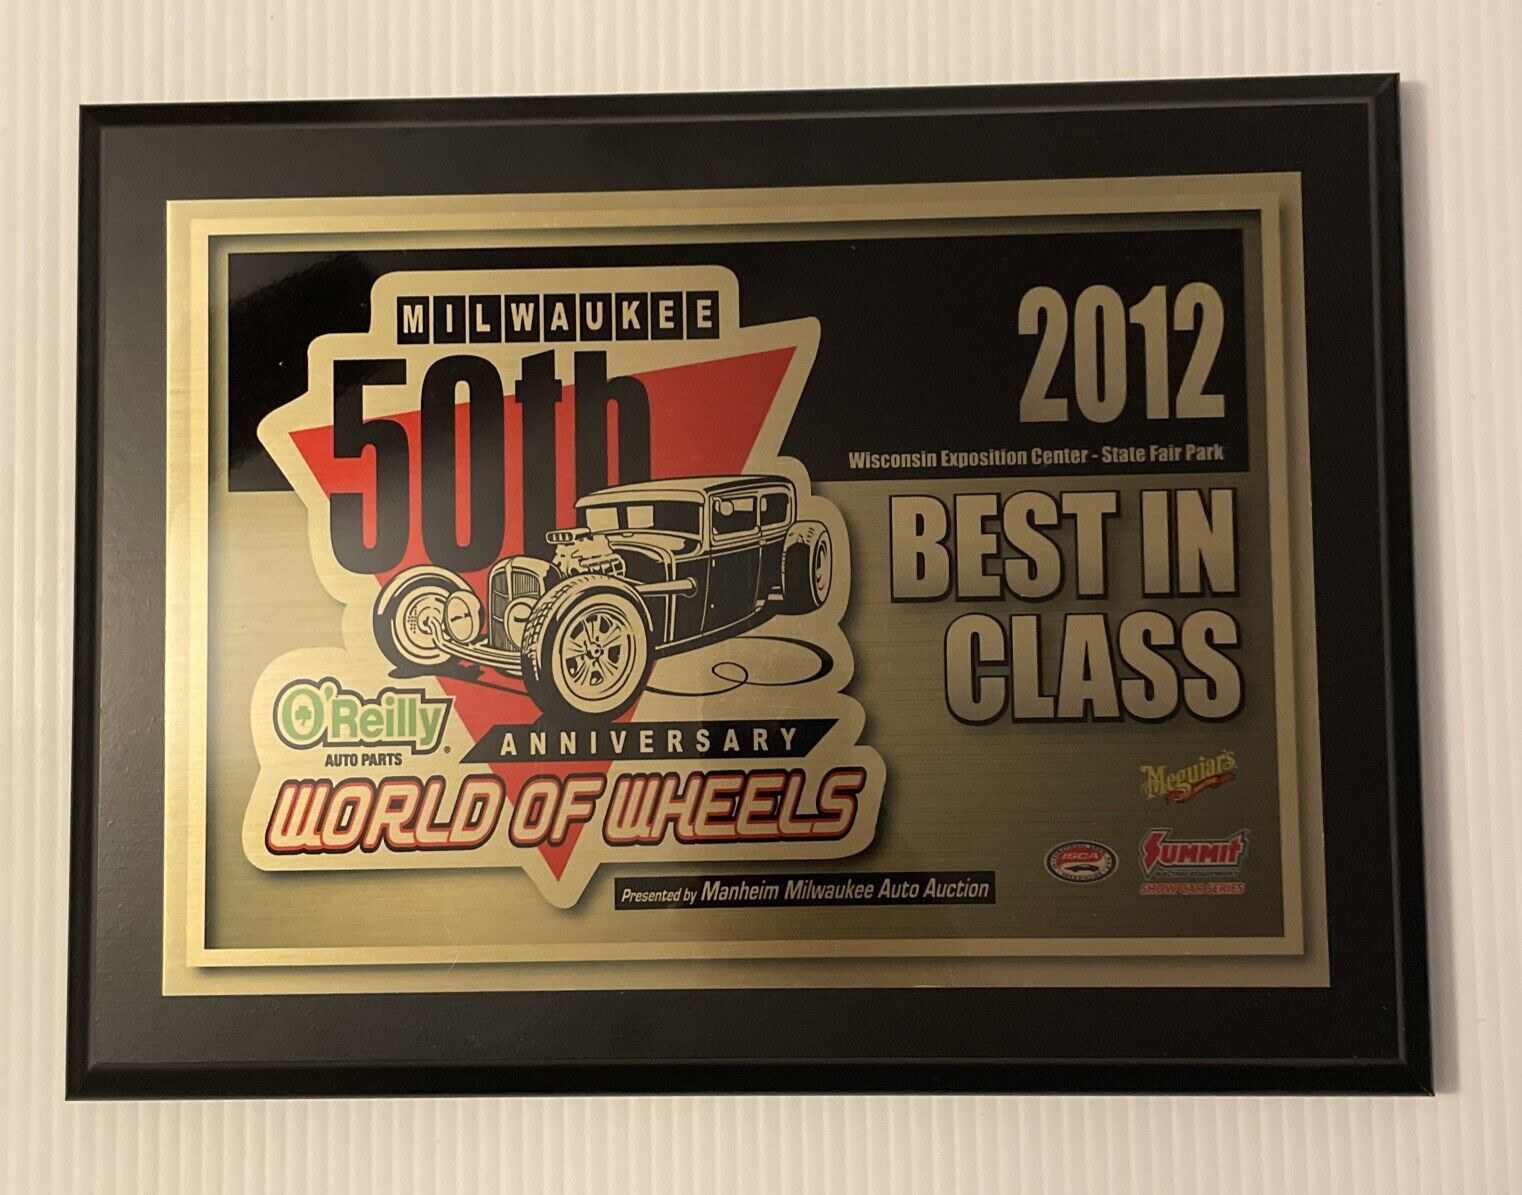 MILWAUKEE 50th Anniversary World of Wheels Show 2012 BEST IN CLASS Plaque Award